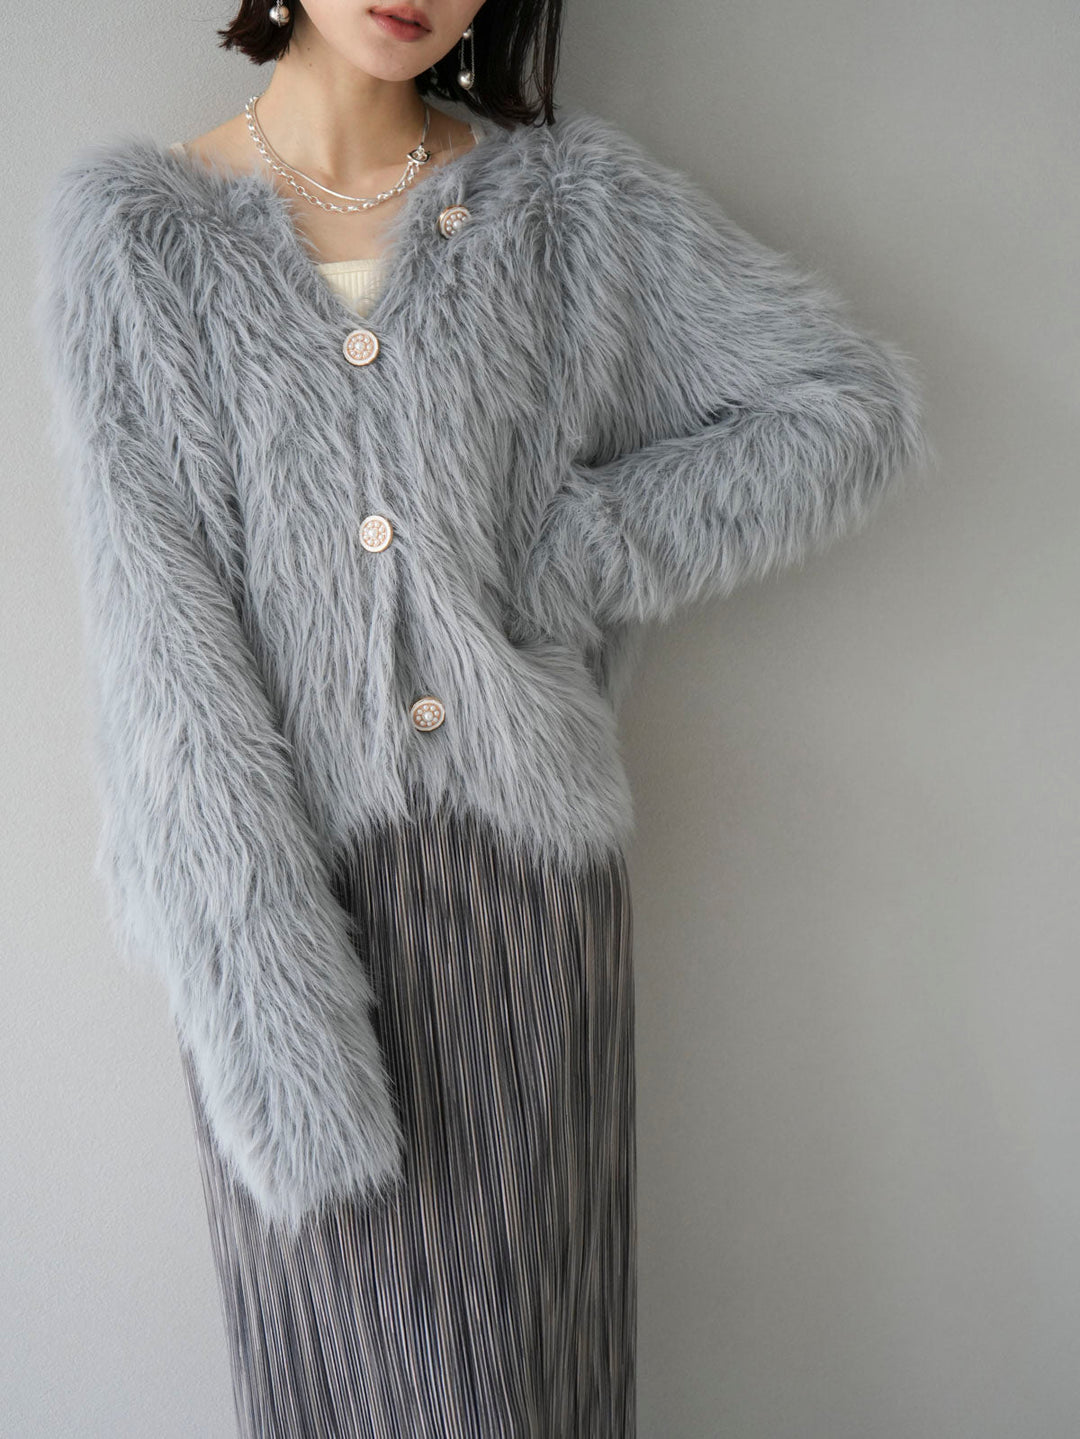 [SET] Pearl design button shaggy knit cardigan + choice of necklace (2 sets)